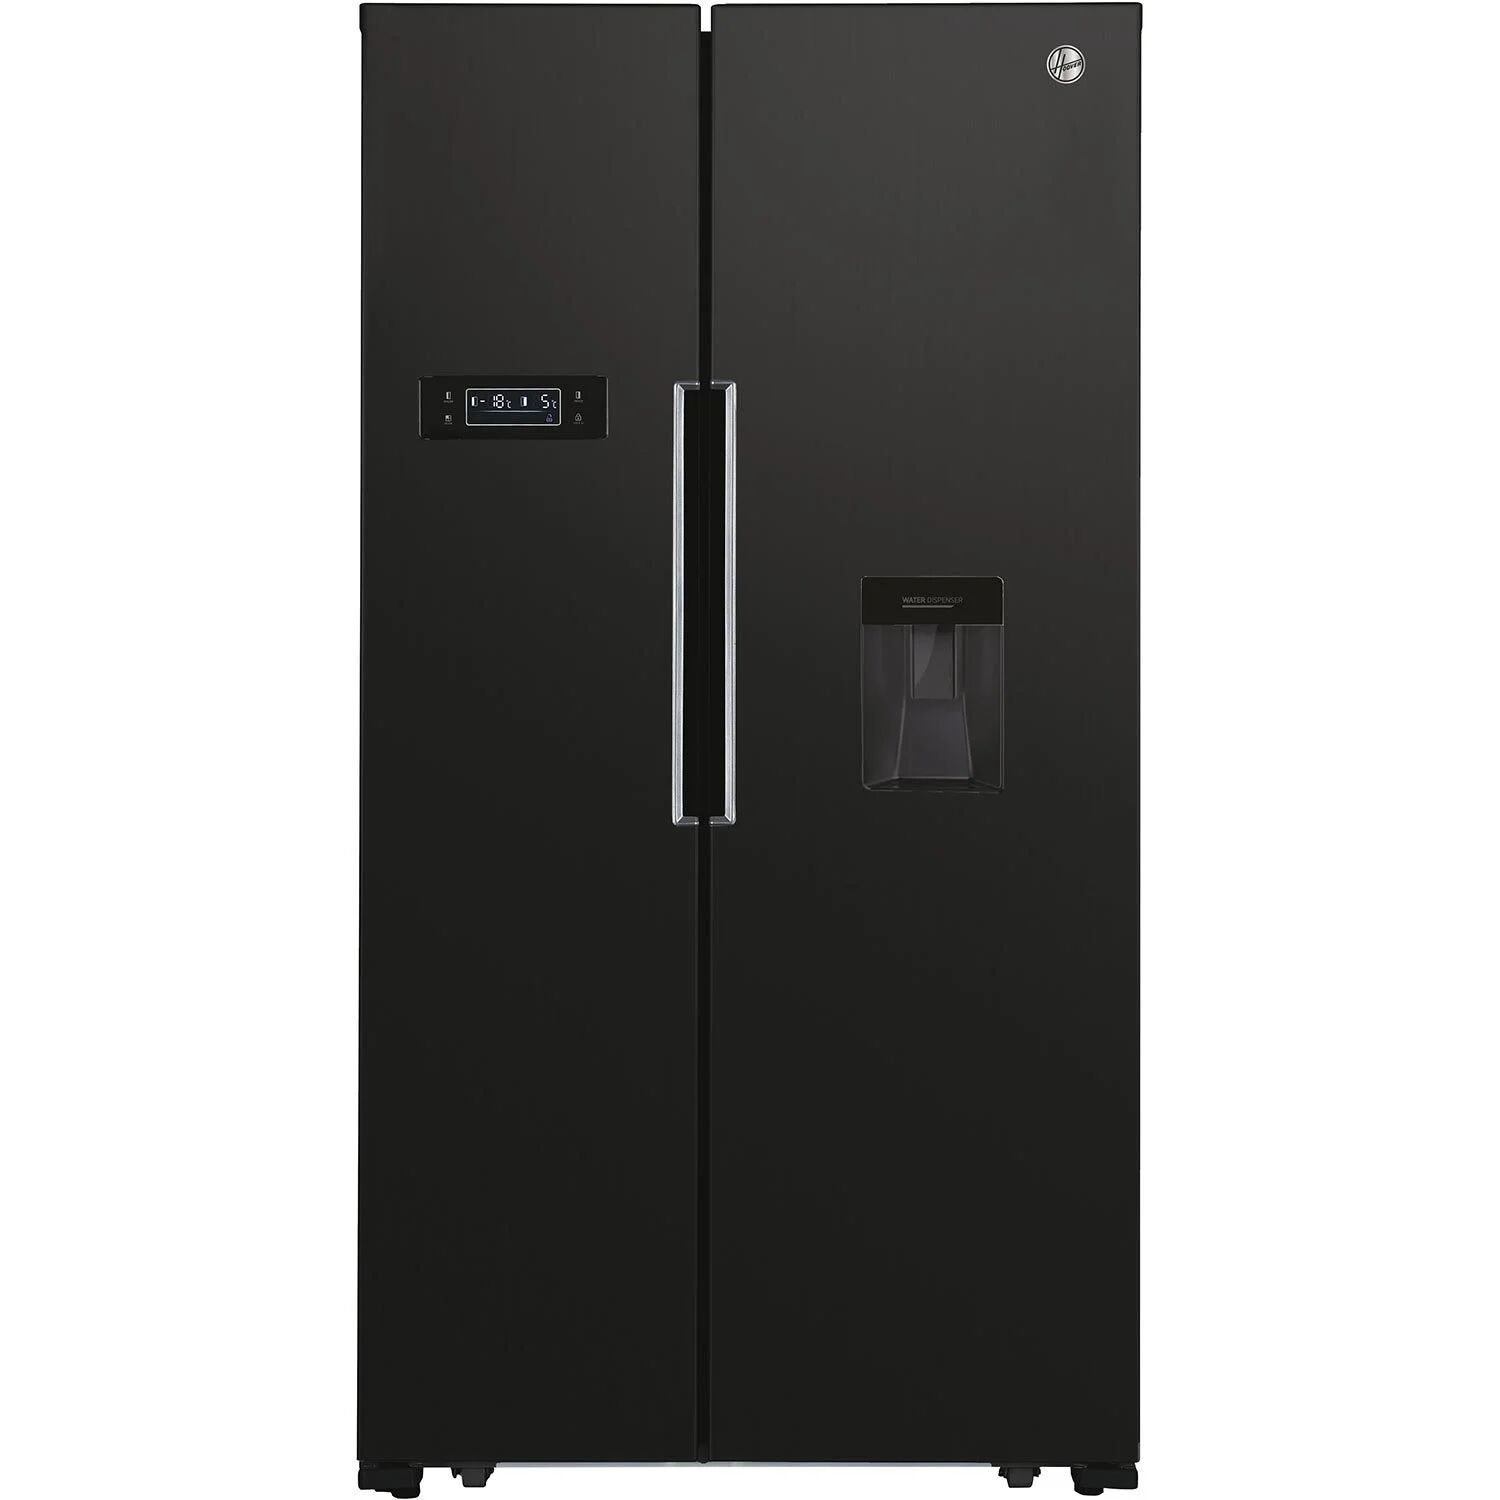 Hoover H-Fridge 500 Maxi 529L American Style Side-by-side Fridge Freezer With Non-plumb Water Dispener - Black